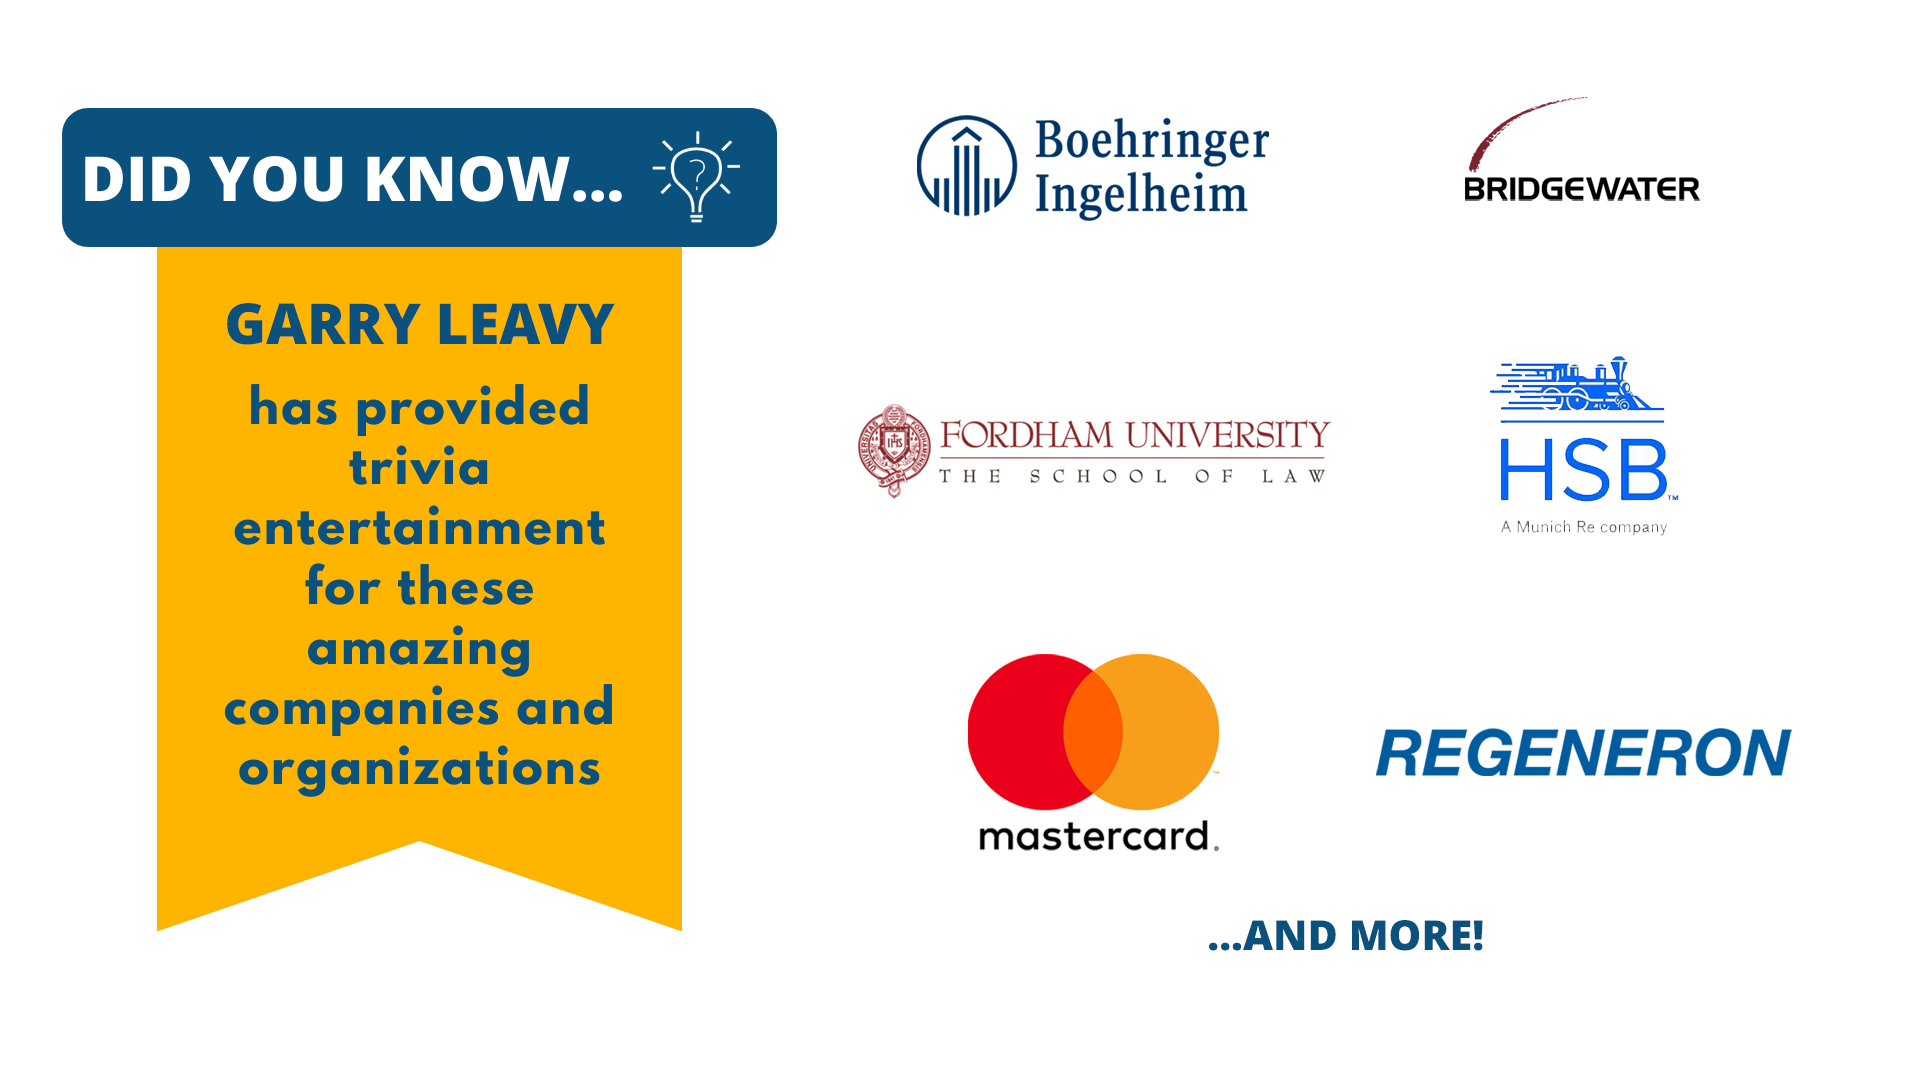 Did you know Garry Leavy has provided trivia entertainment for amazing companies and organizations like MasterCard, Bridgewater, Fordham University School of Law, and more!